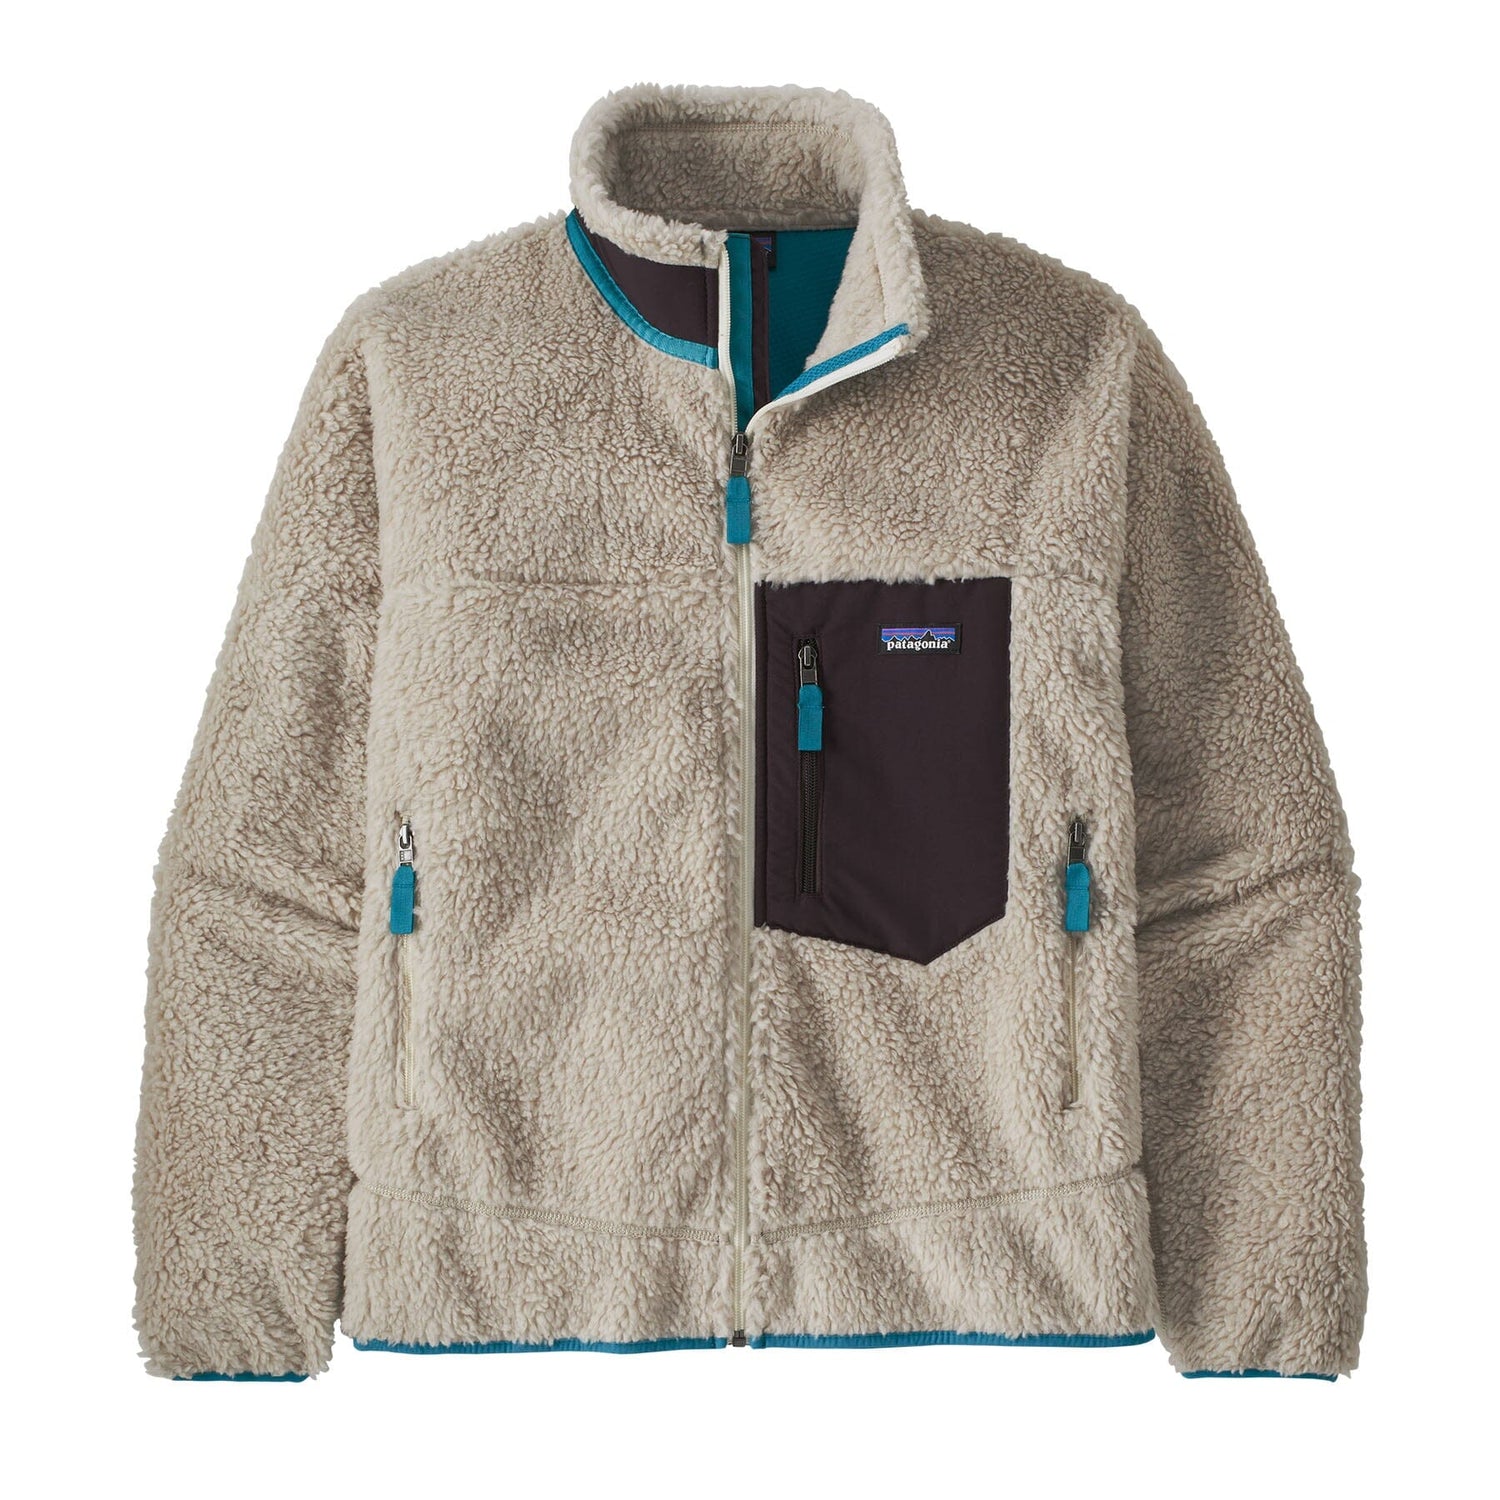 Patagonia M's Classic Retro-X Fleece Jacket - Recycled Polyester Natural w Obsidian Plum Jacket